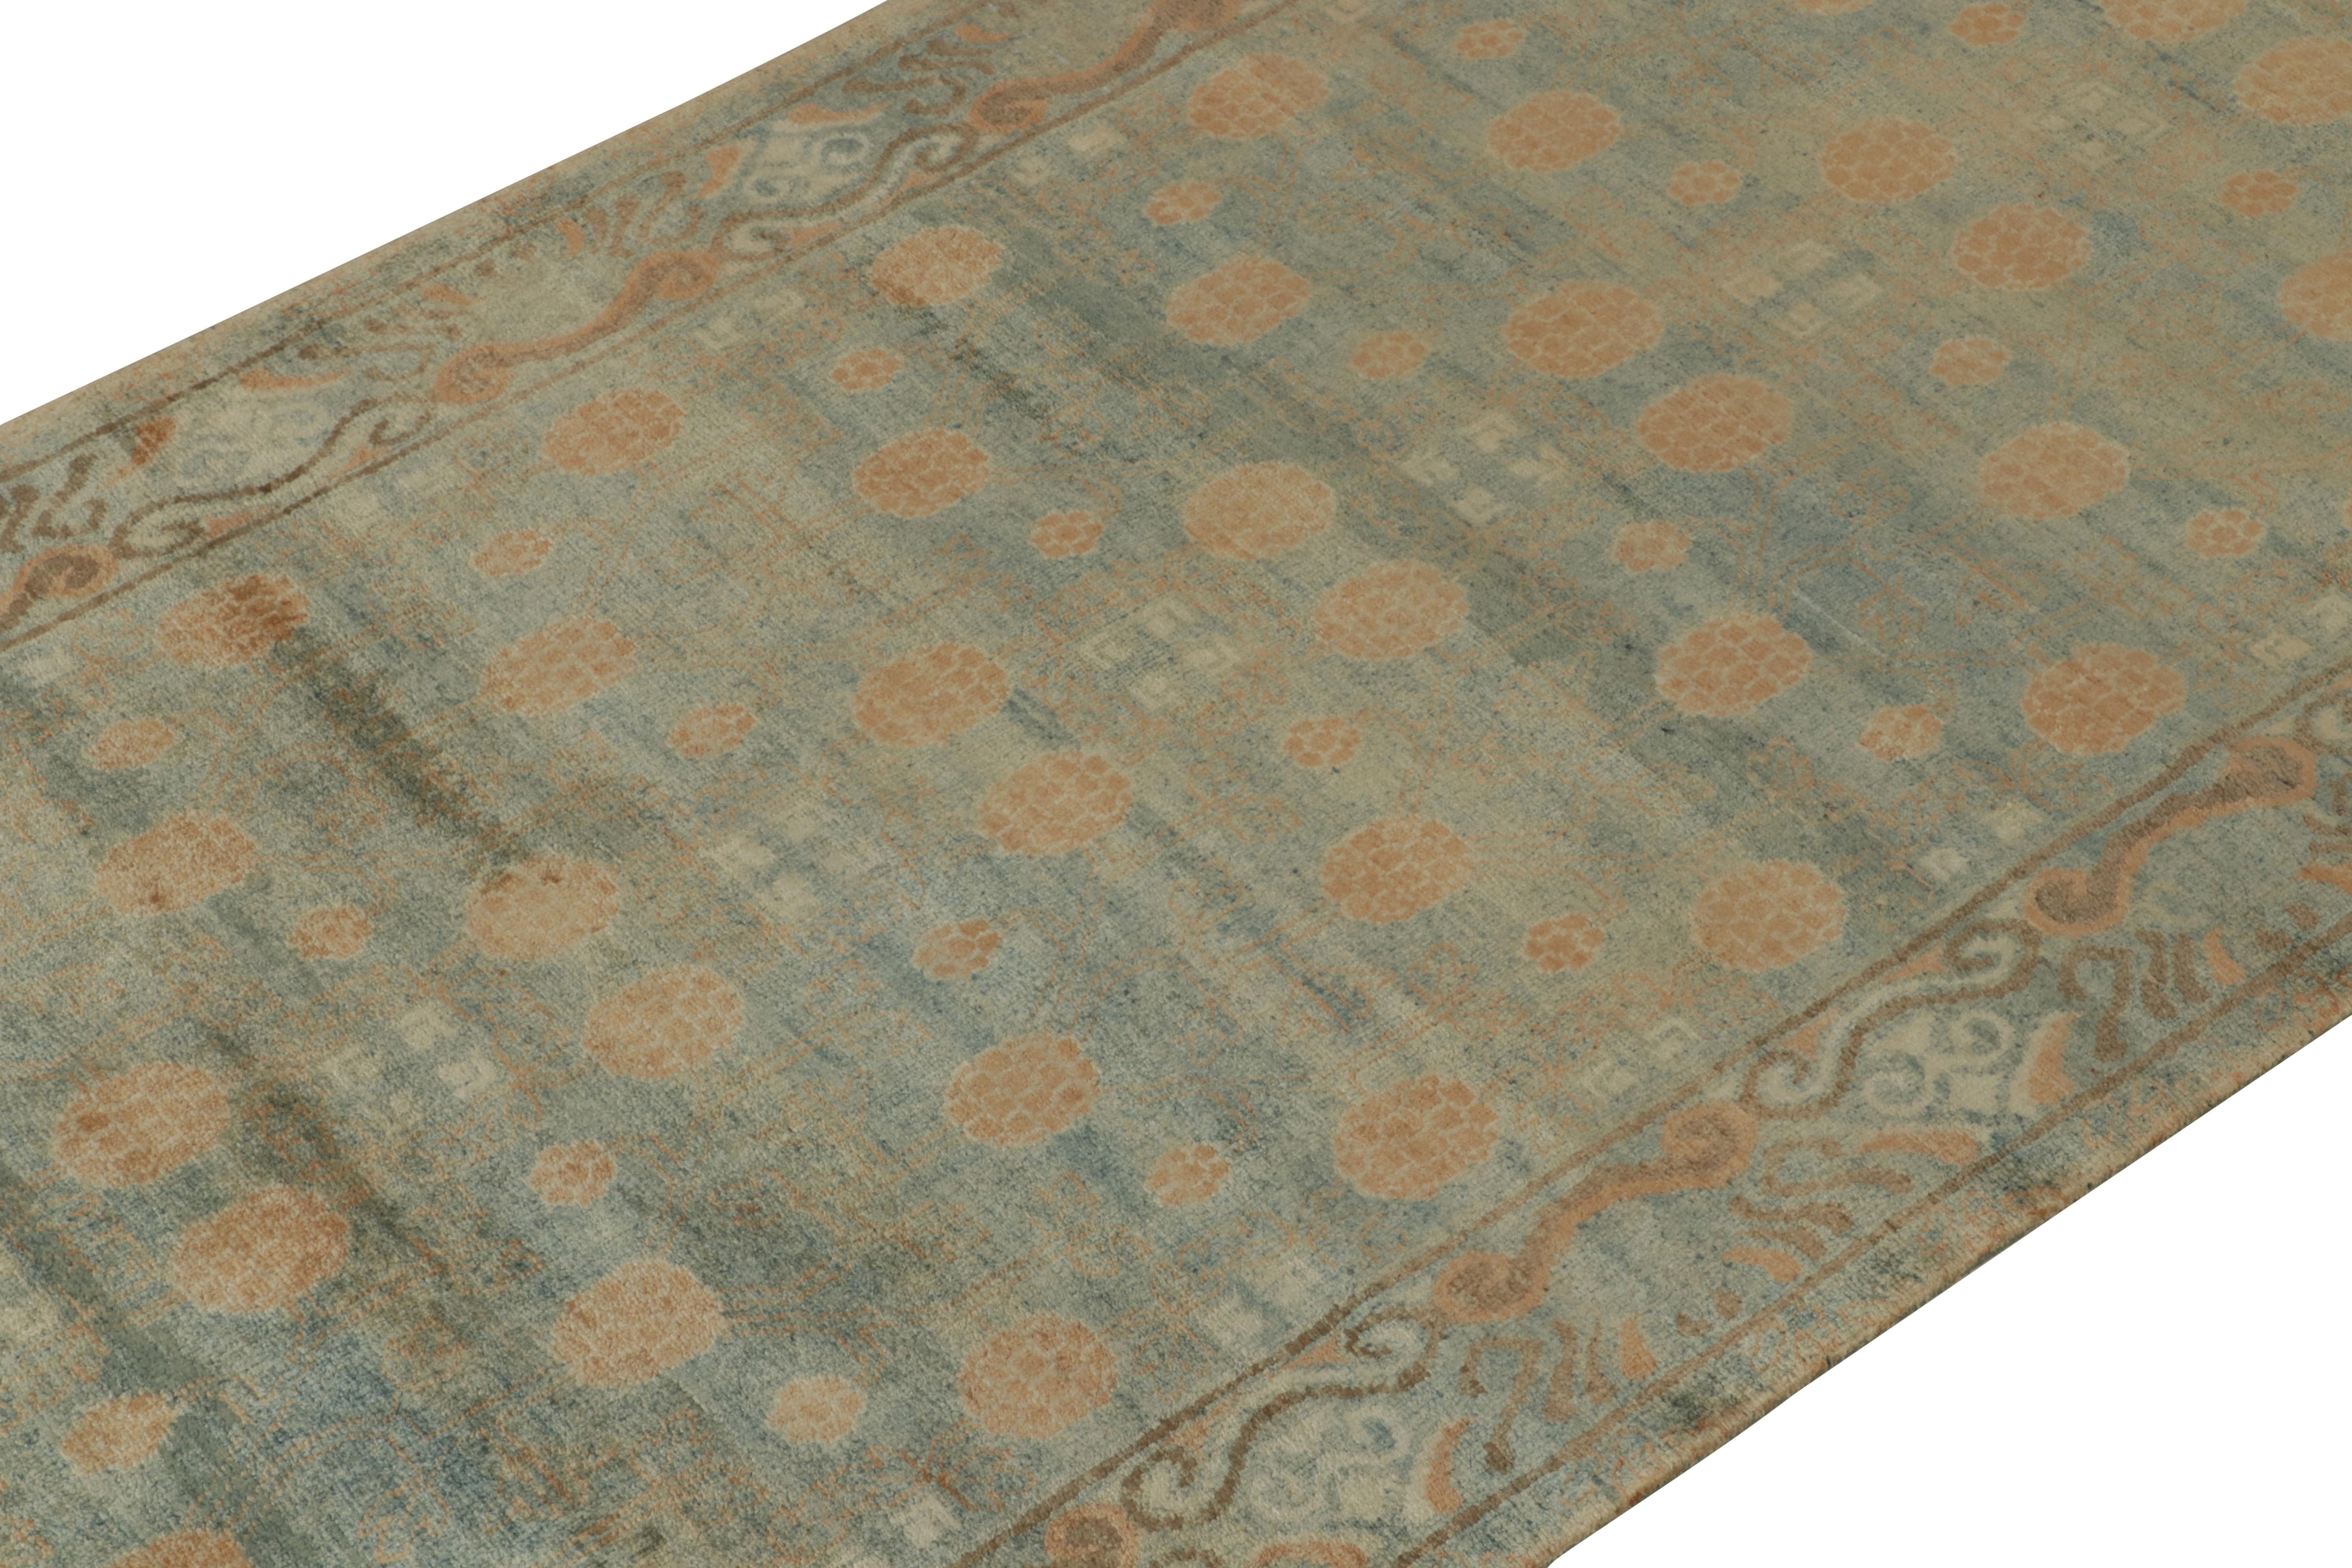 Hand-Knotted Rug & Kilim’s Khotan Style Rug in Blue, Beige-Brown Pomegranate Pattern For Sale